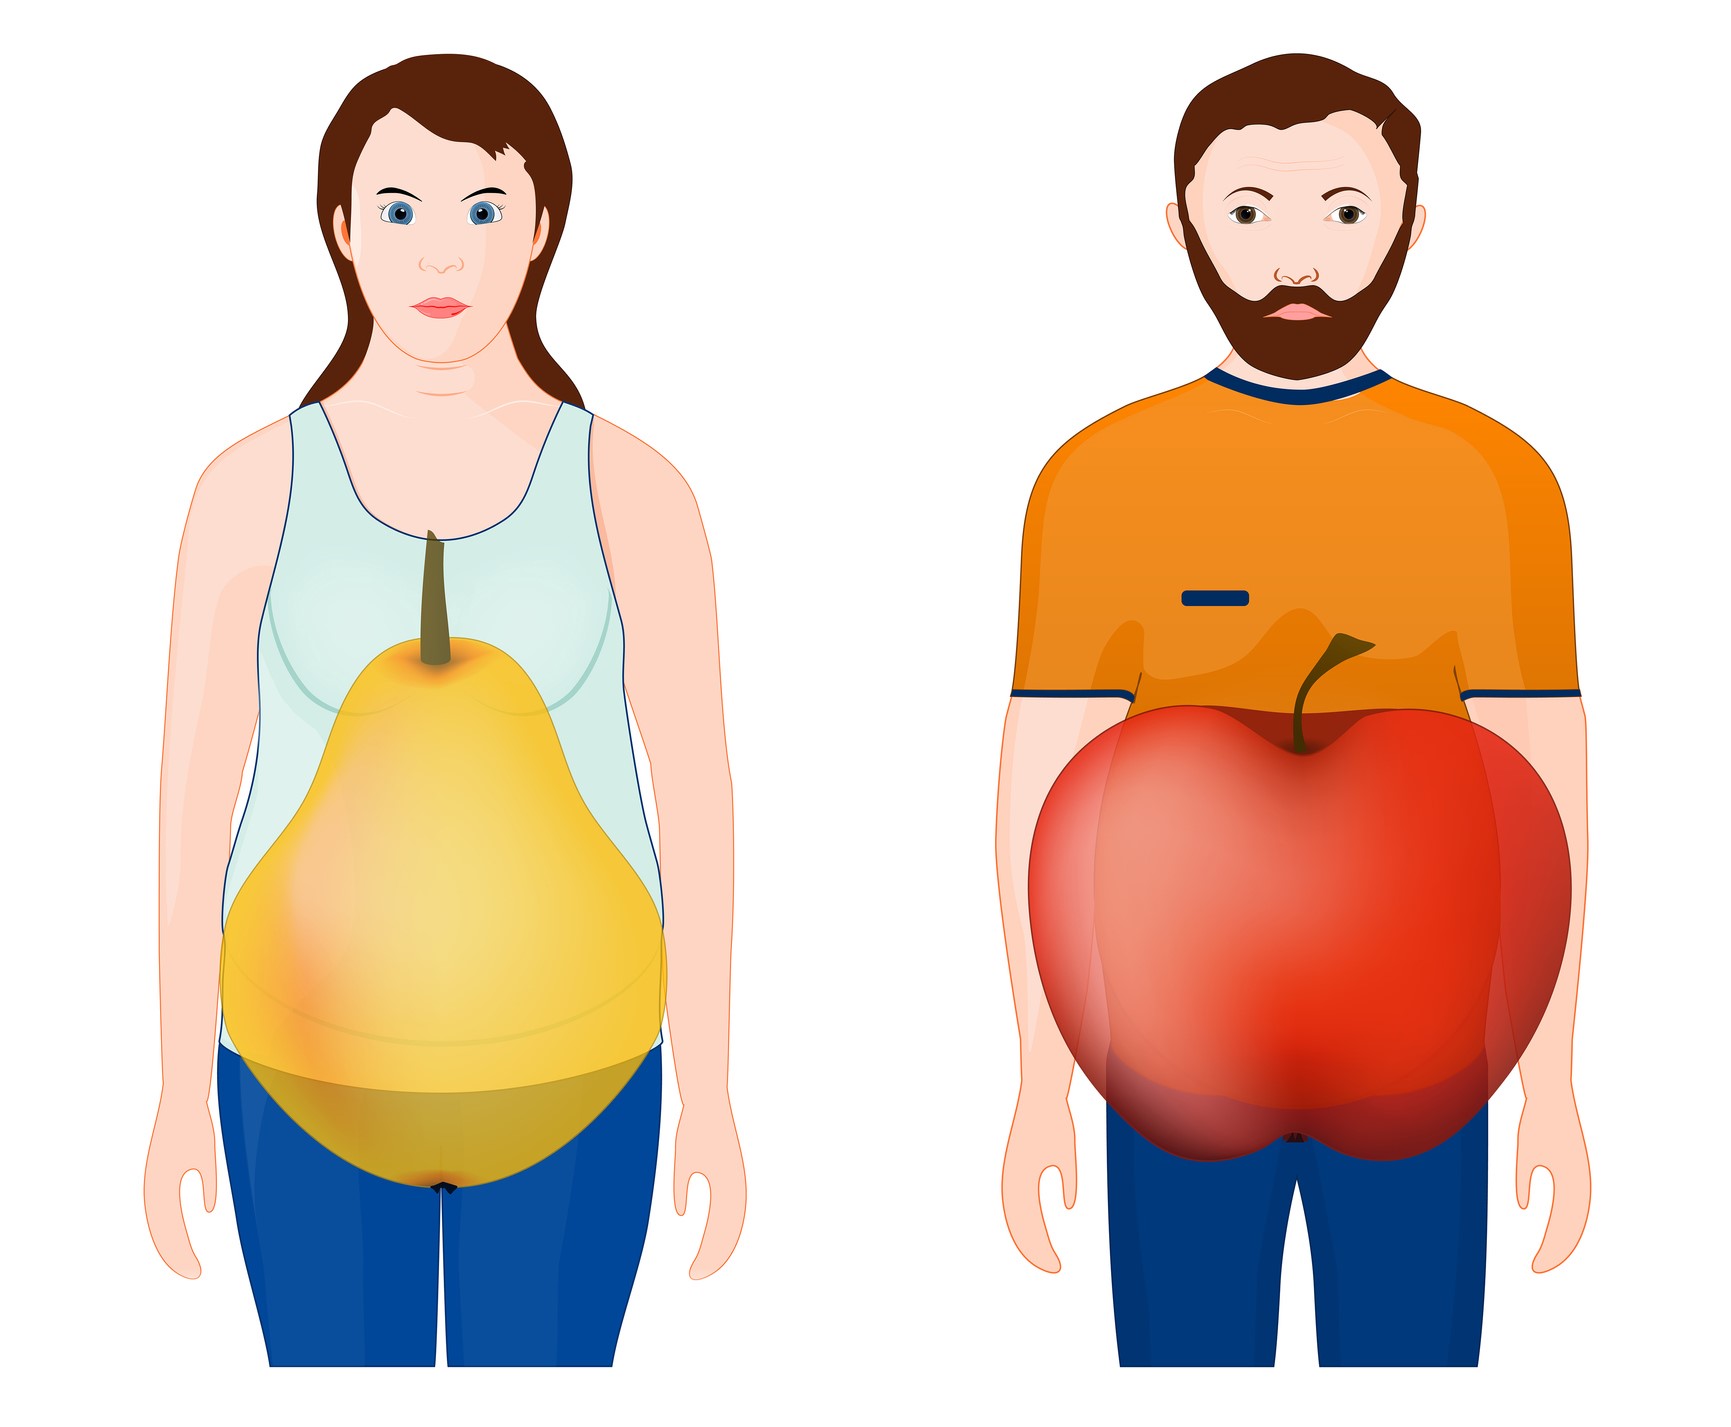 Animation showing the shape of the body - woman, pear, man, apple